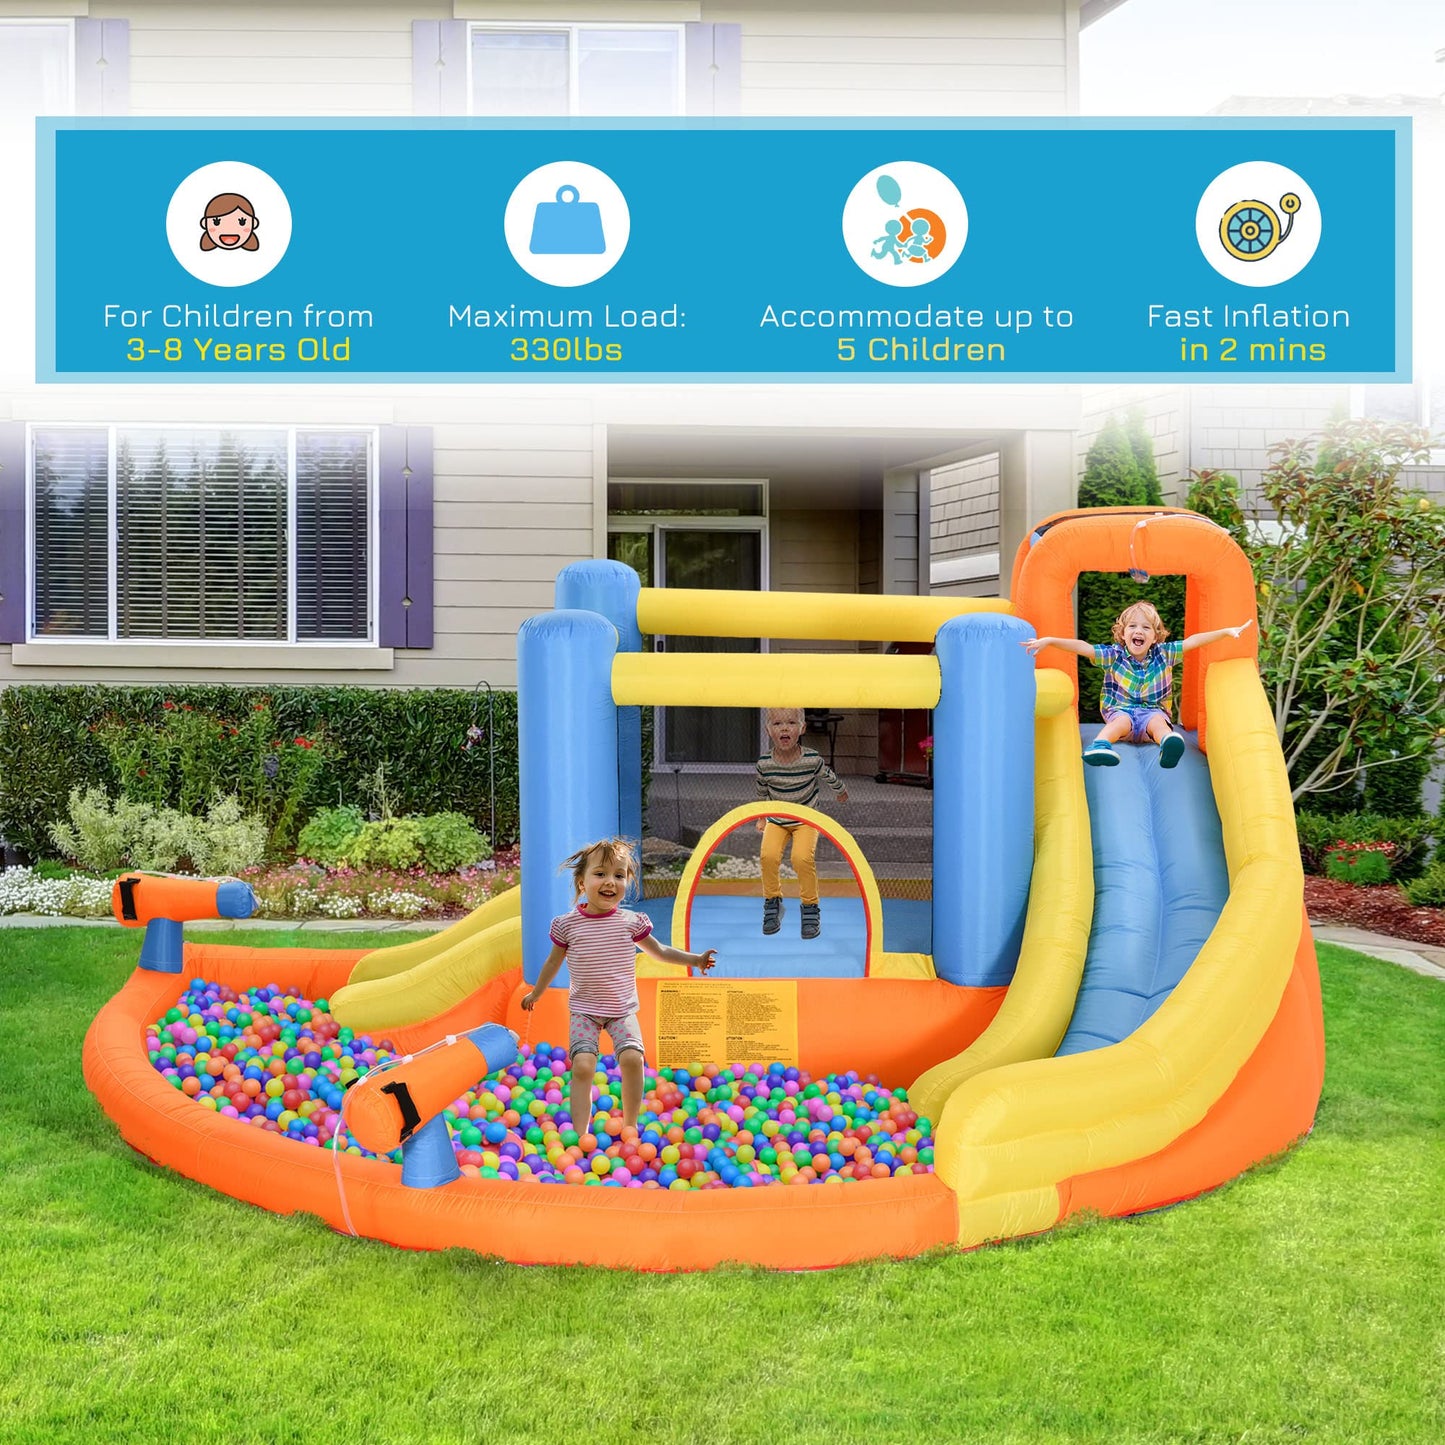 Outsunny Kids Inflatable Water Slide 5-in-1 Bounce House Water Park Jumping Castle with Water Pool, Slide, Climbing Walls, & 2 Water Cannons, 450W Air Blower